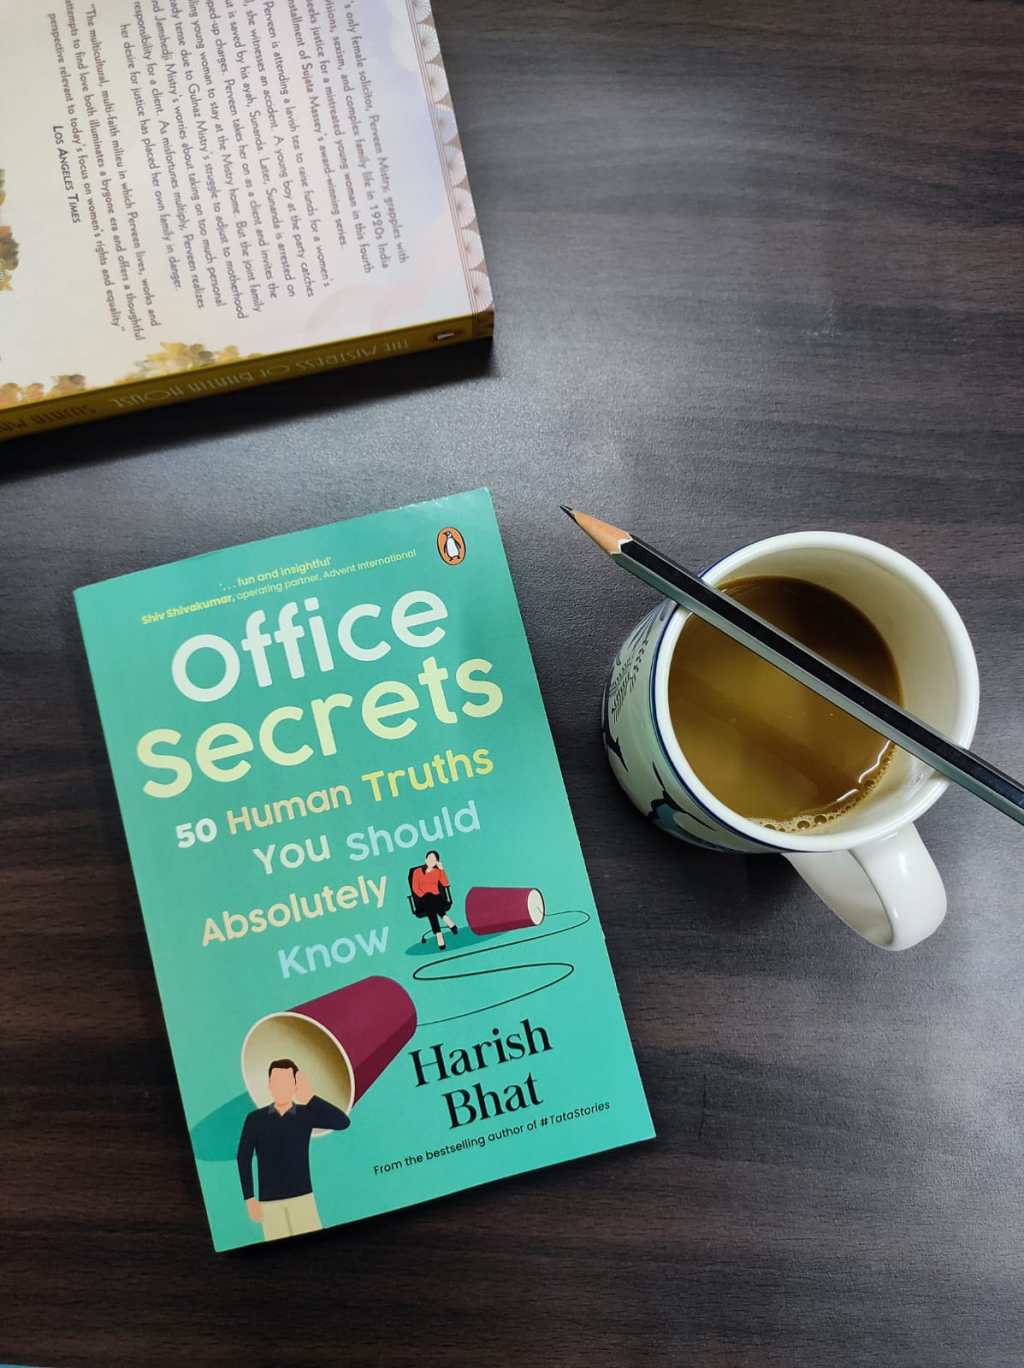 The book aims to make people relax and enjoy the work: Book Review – Office Secrets – 50 Human truths you should absolutely know